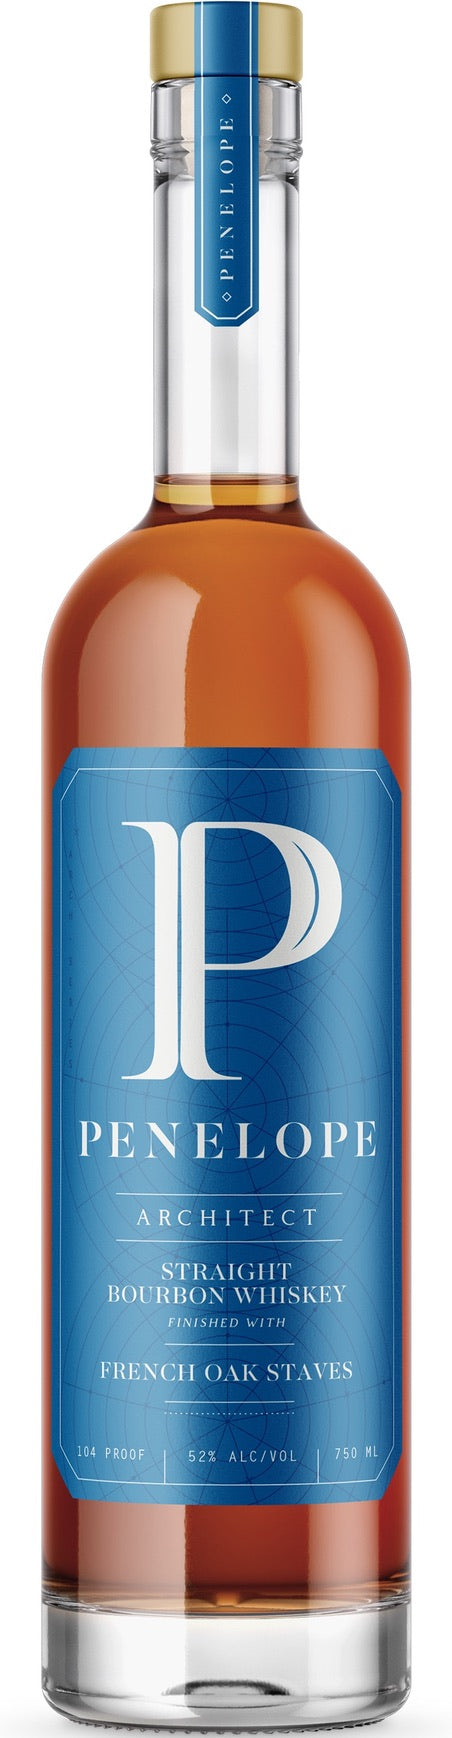 Penelope Architect Bourbon Finished with French Oak Staves 750ML R